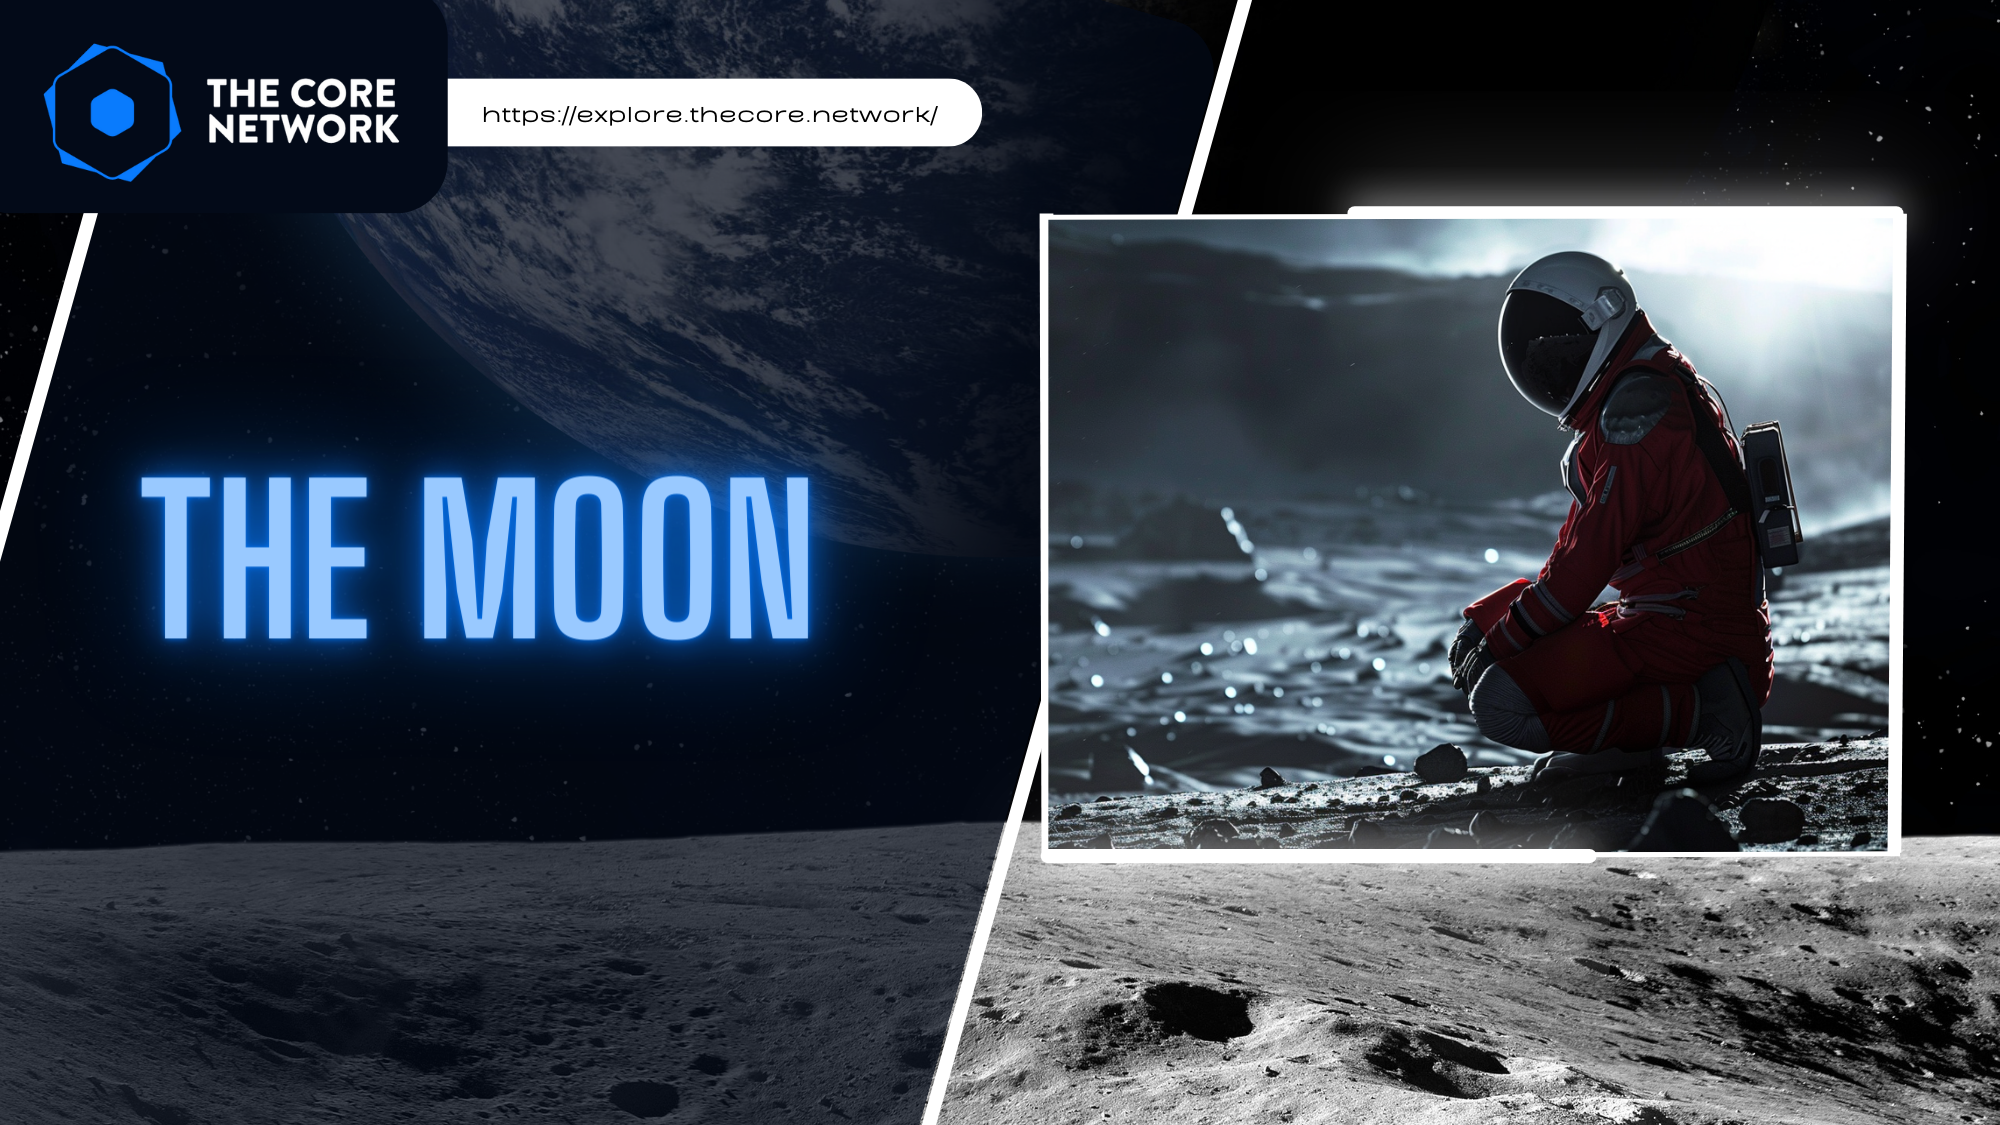 The Moon: A New Era for Humanity